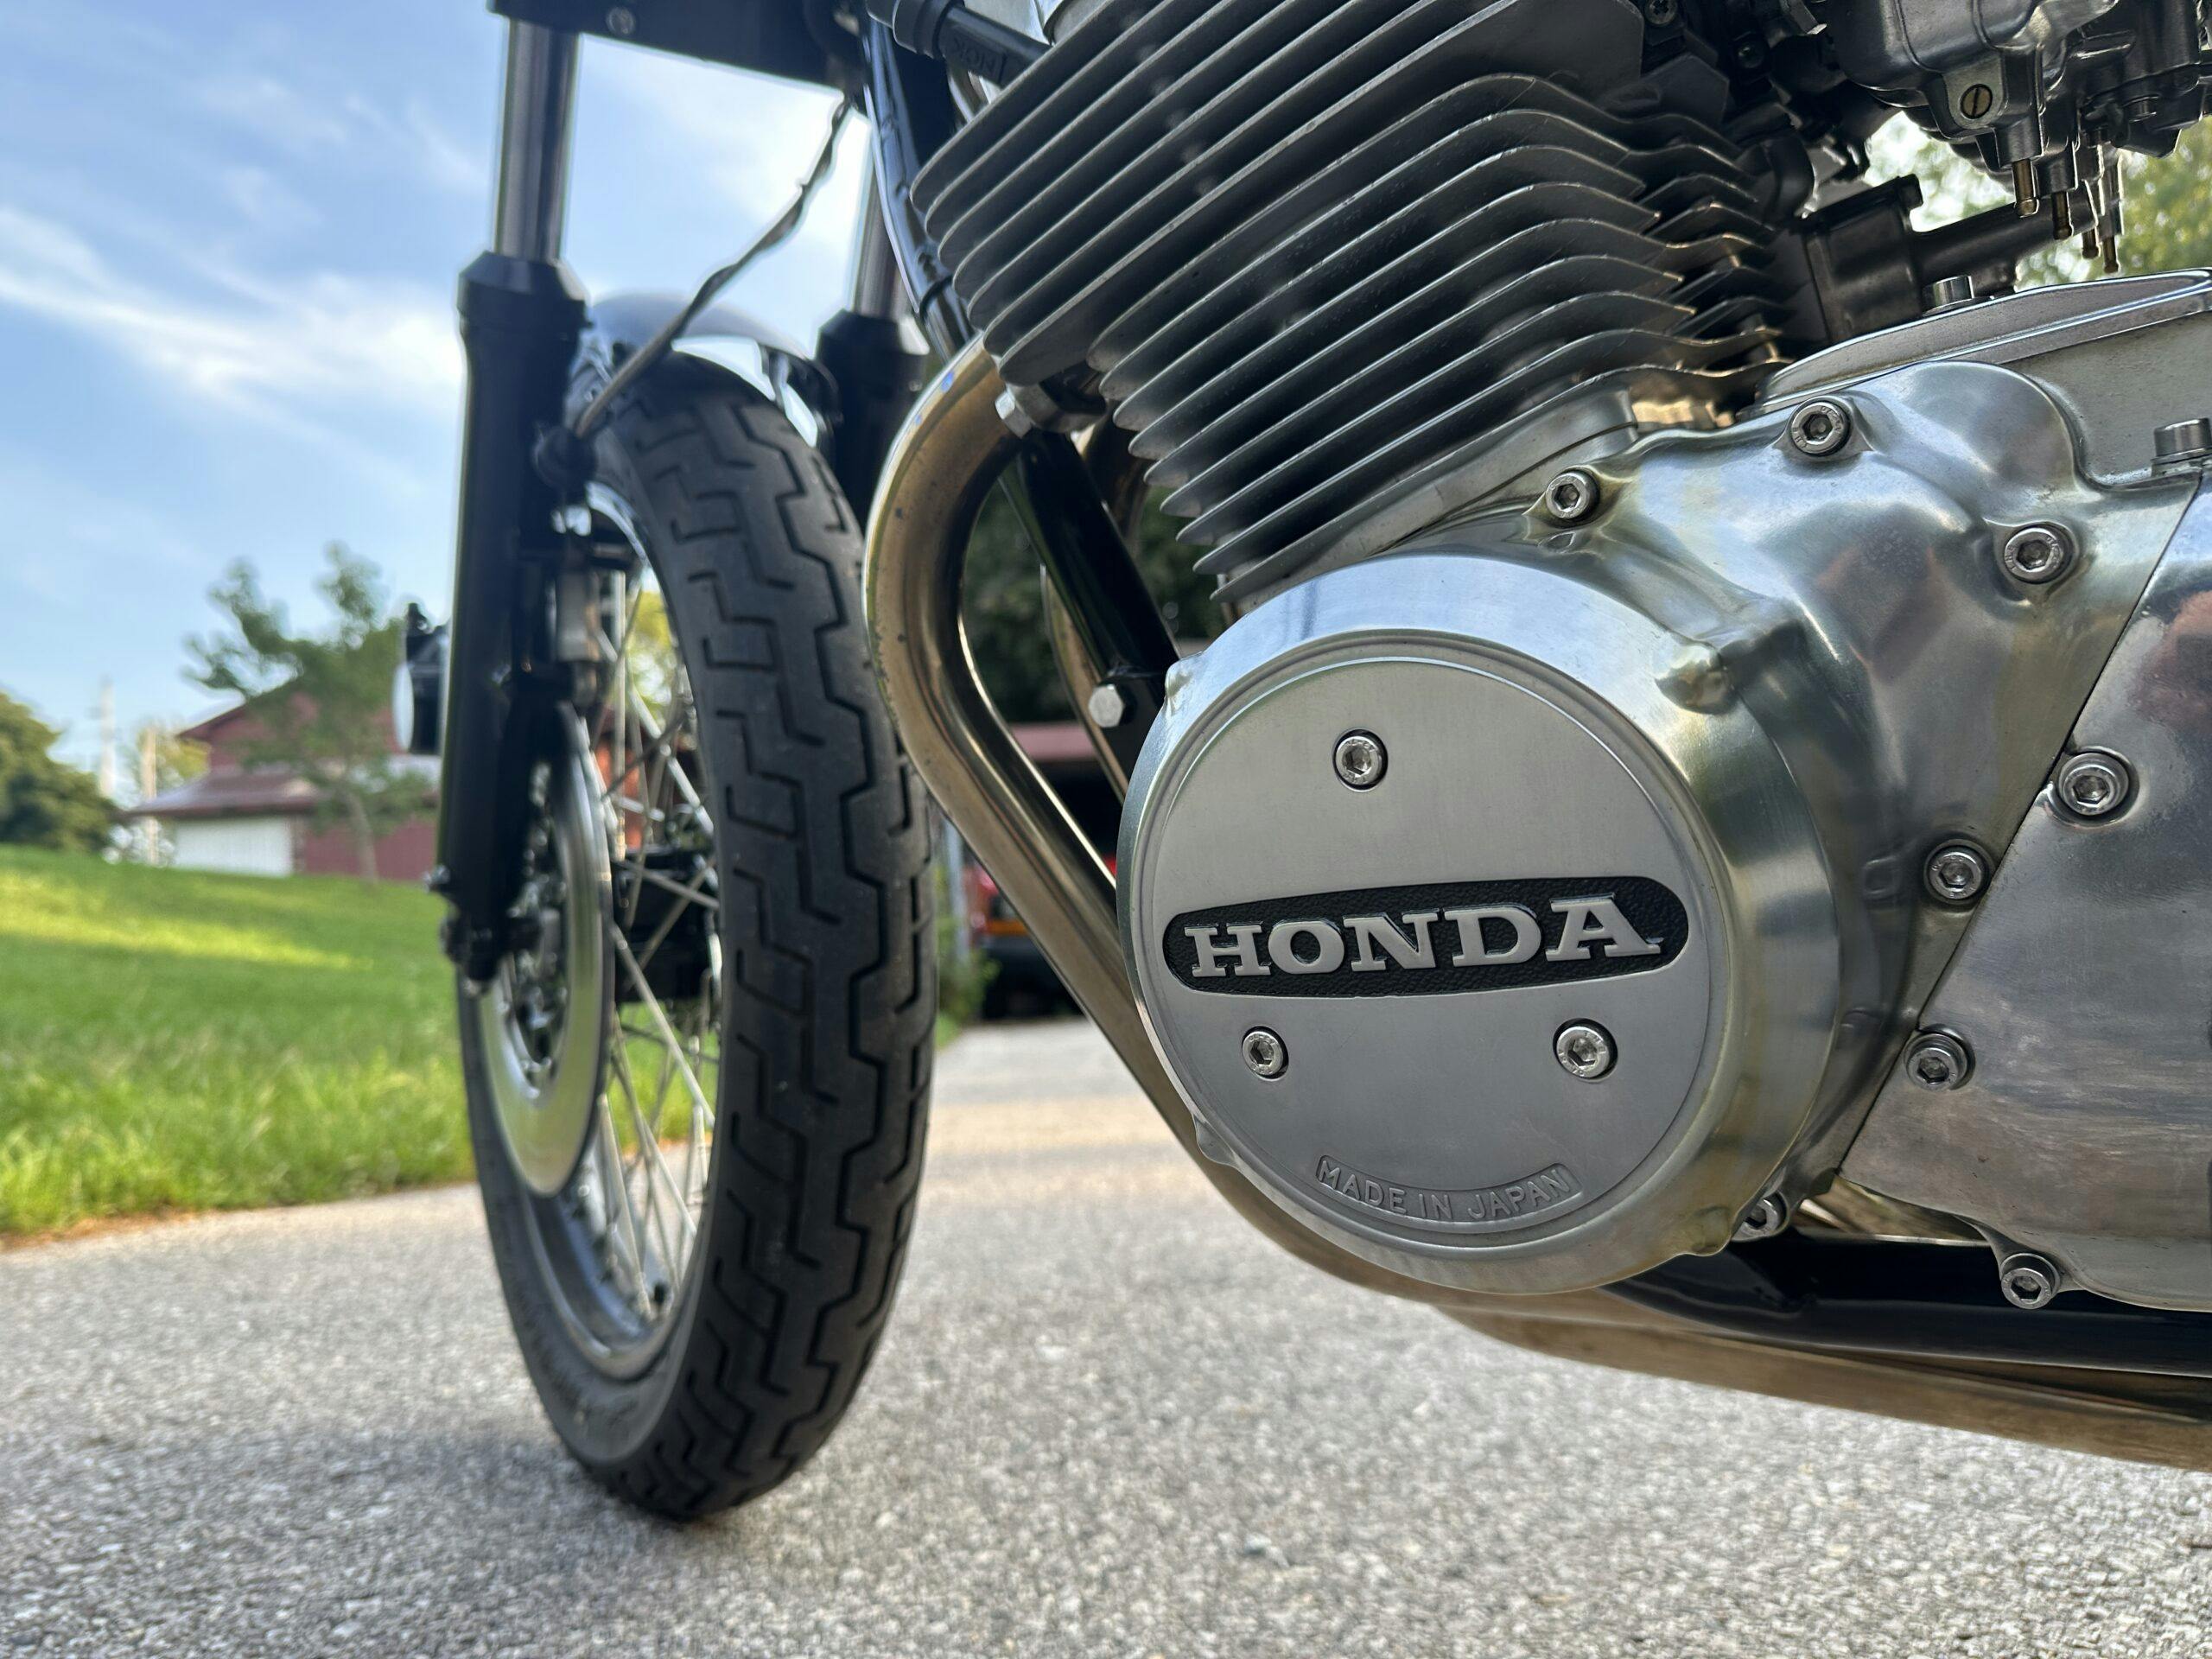 Honda CB750 cafe left engine cover and front wheel